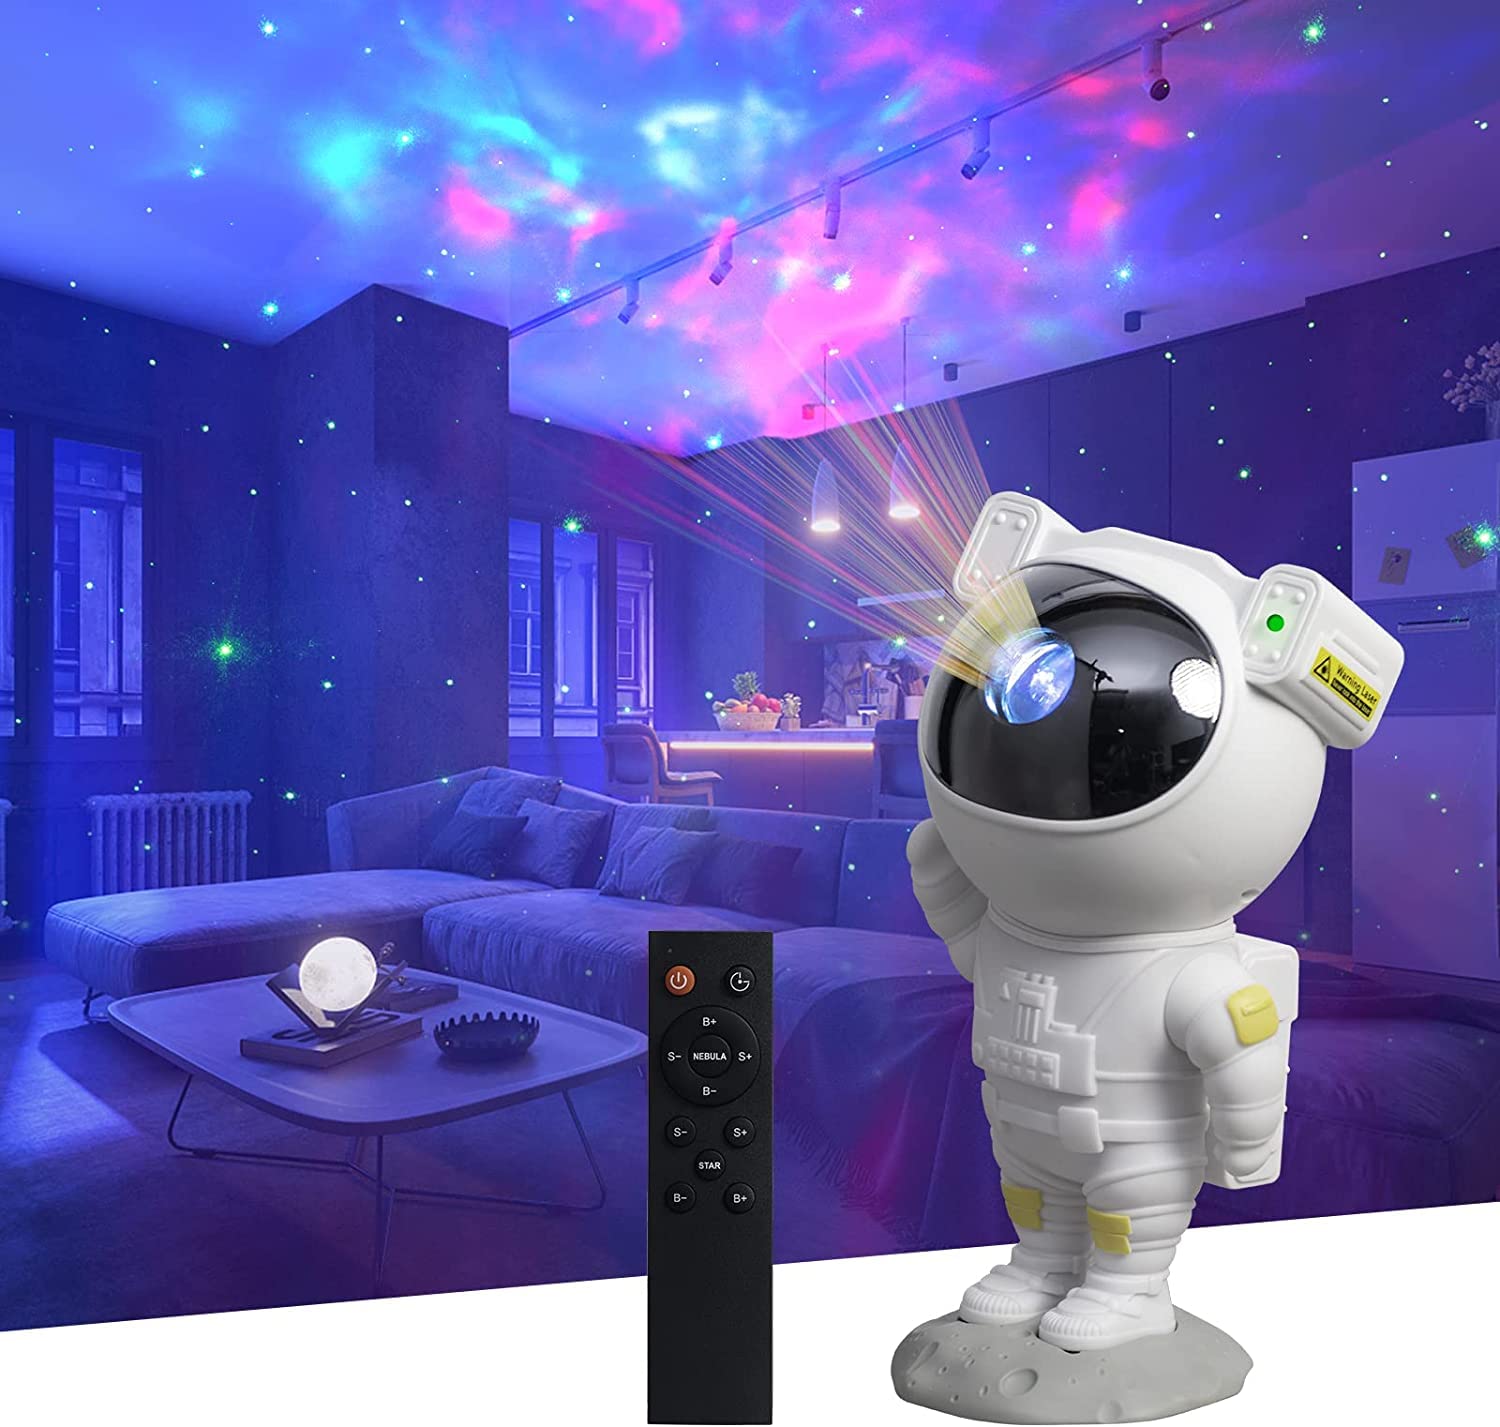 Astro Night Light Projector, Galaxy Light Star Projector with Remote Control